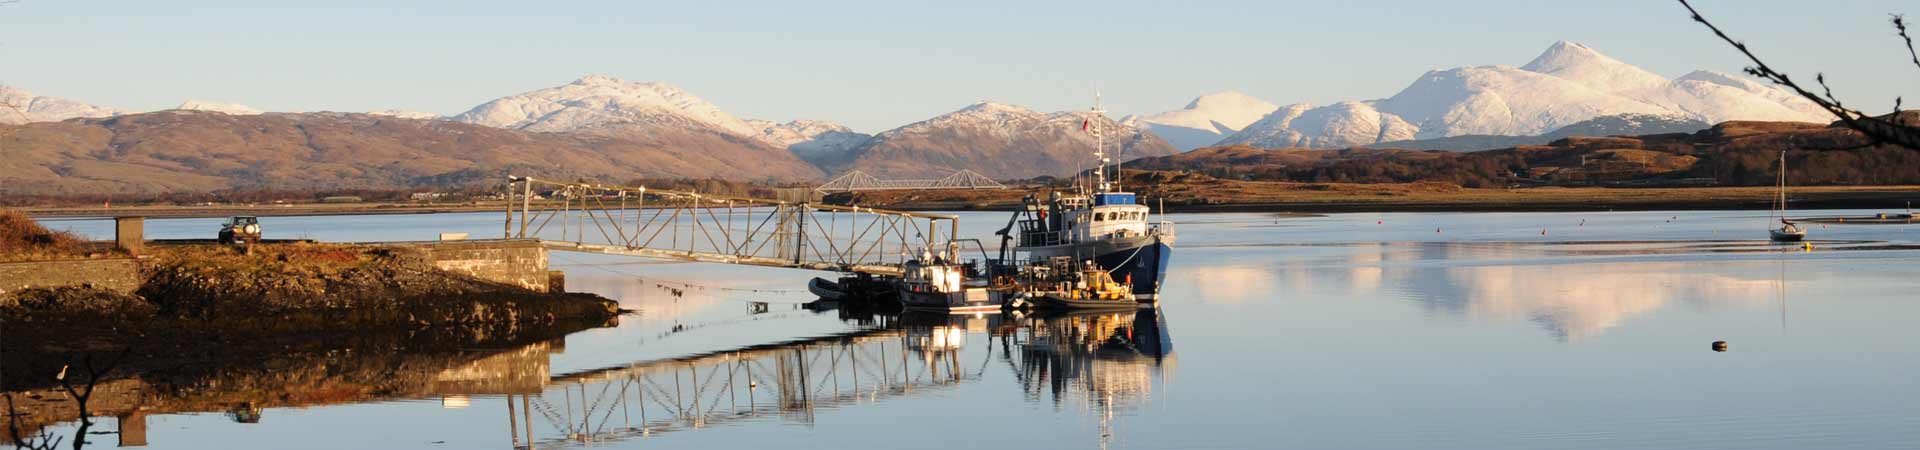 Image showing our pontoon with both vessels and a dive boat tied up during late autumn with snowy mountains